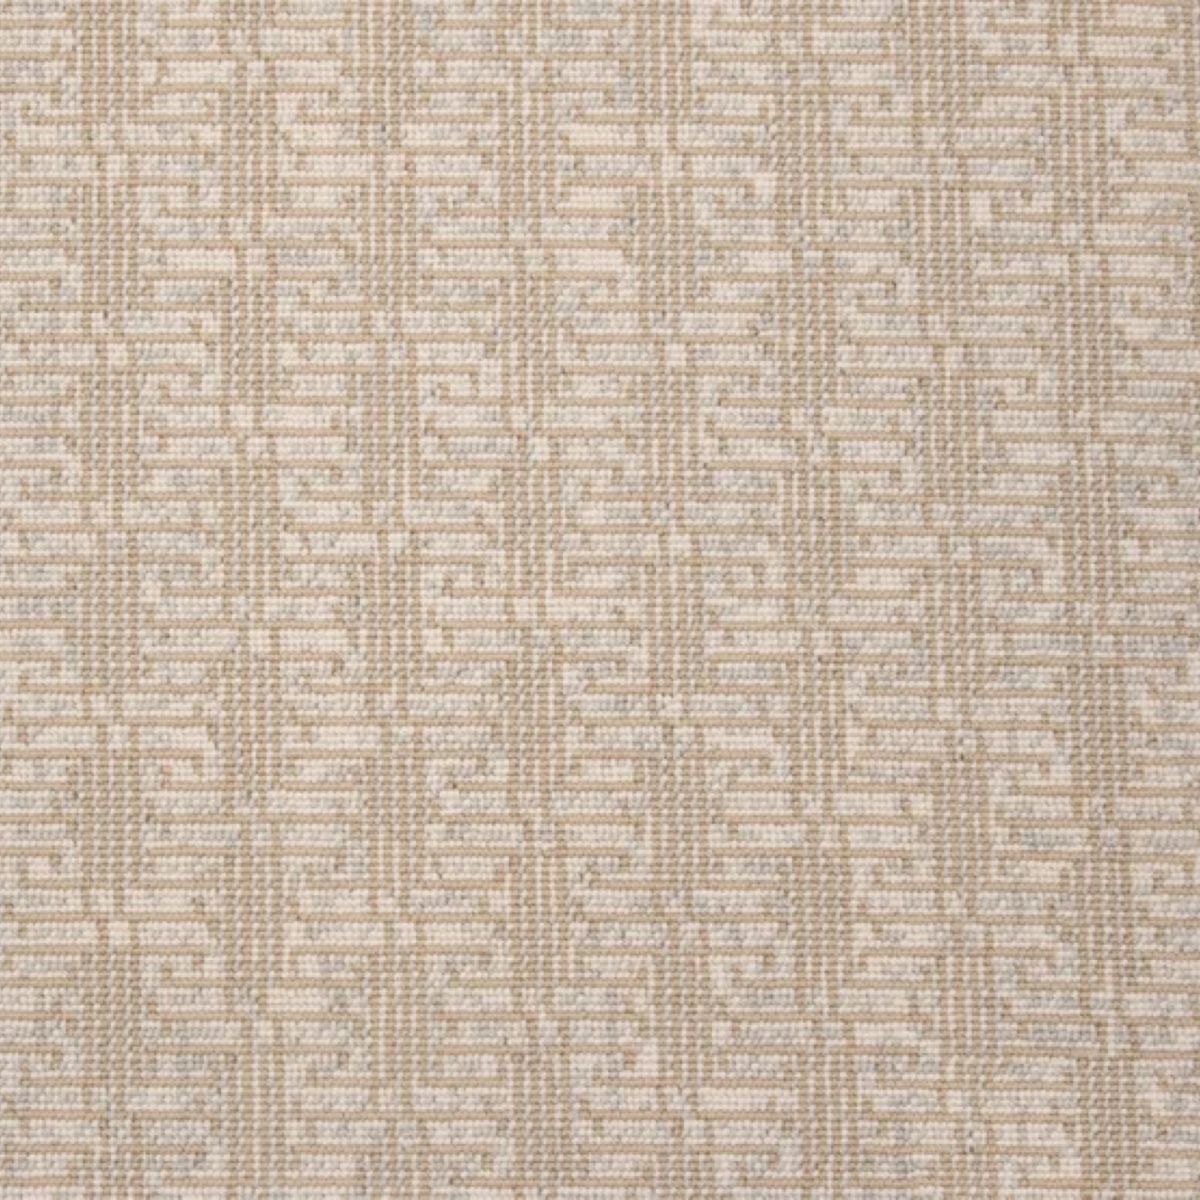 Stanton Carpet - Paxton Paradox - French Gold